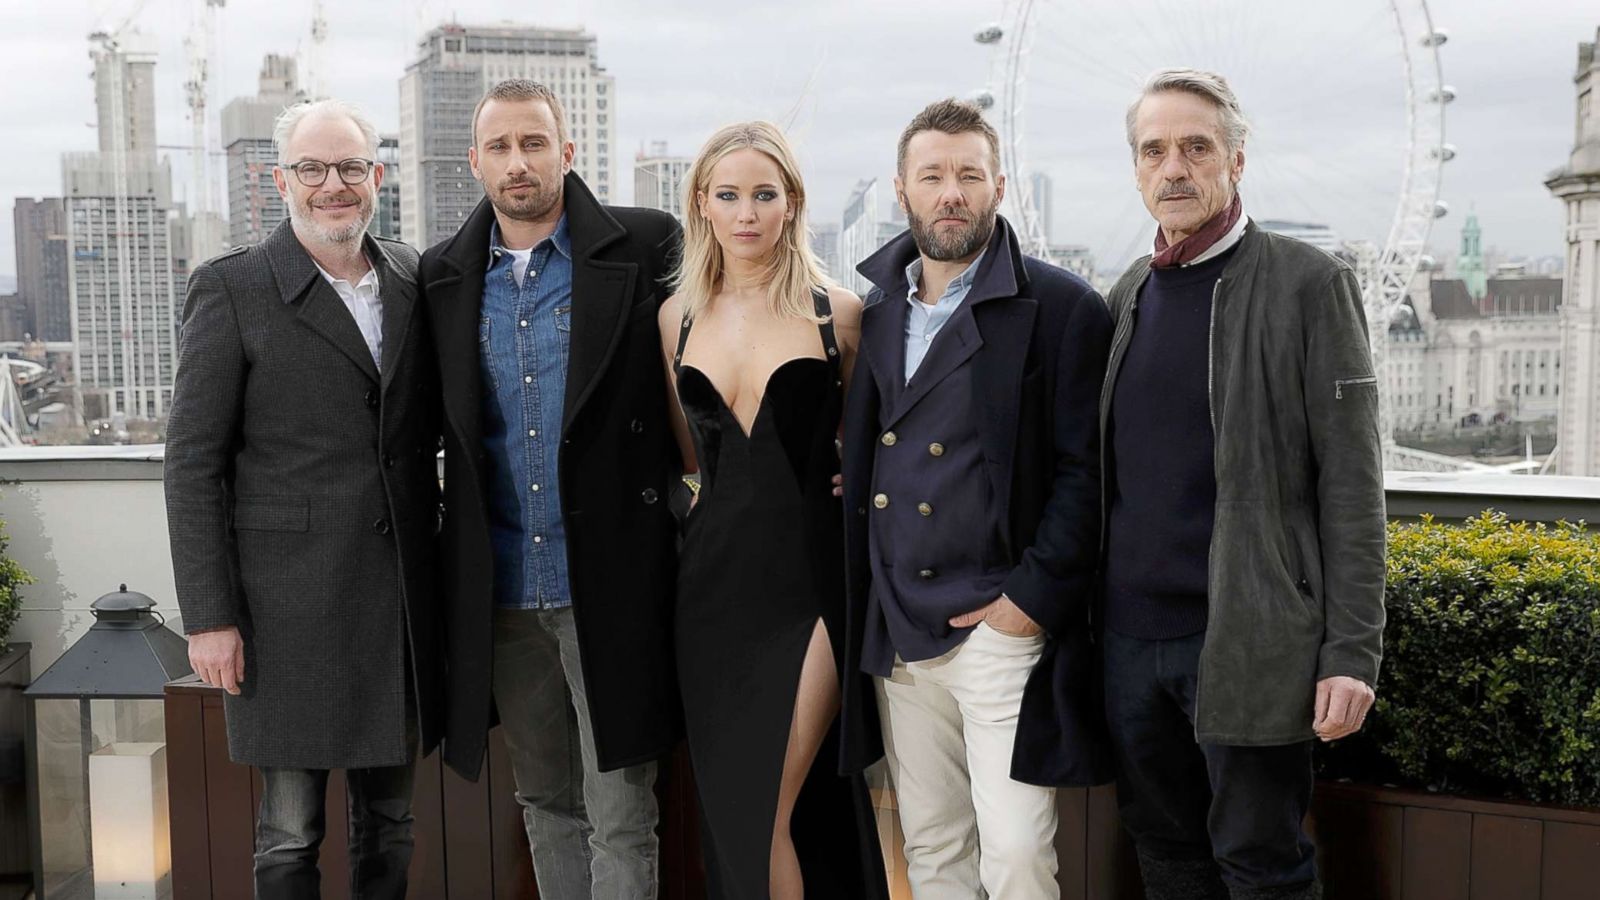 PHOTO: Francis Lawrence, Matthias Schoenaerts, Jennifer Lawrence, Joel Edgerton and Jeremy Irons during the "Red Sparrow" photocall at The Corinthia Hotel on Feb.20, 2018 in London.